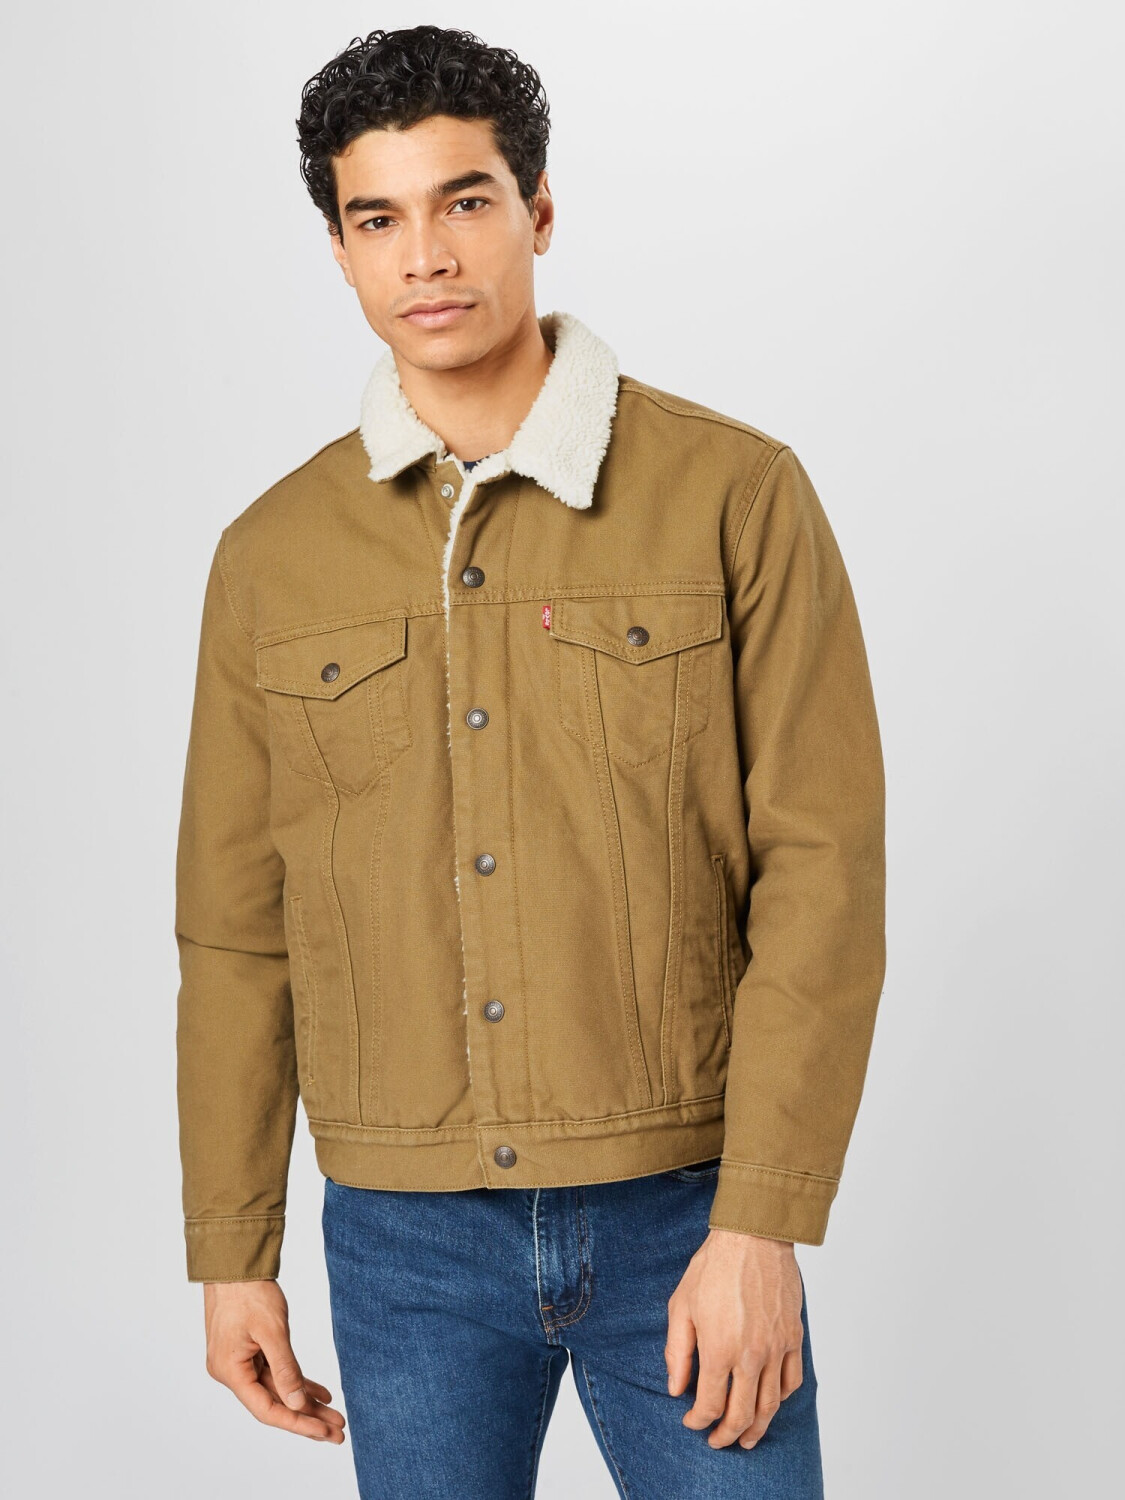 Buy Levi's Type 3 Sherpa Trucker Jacket cougar canvas from £54.99 ...